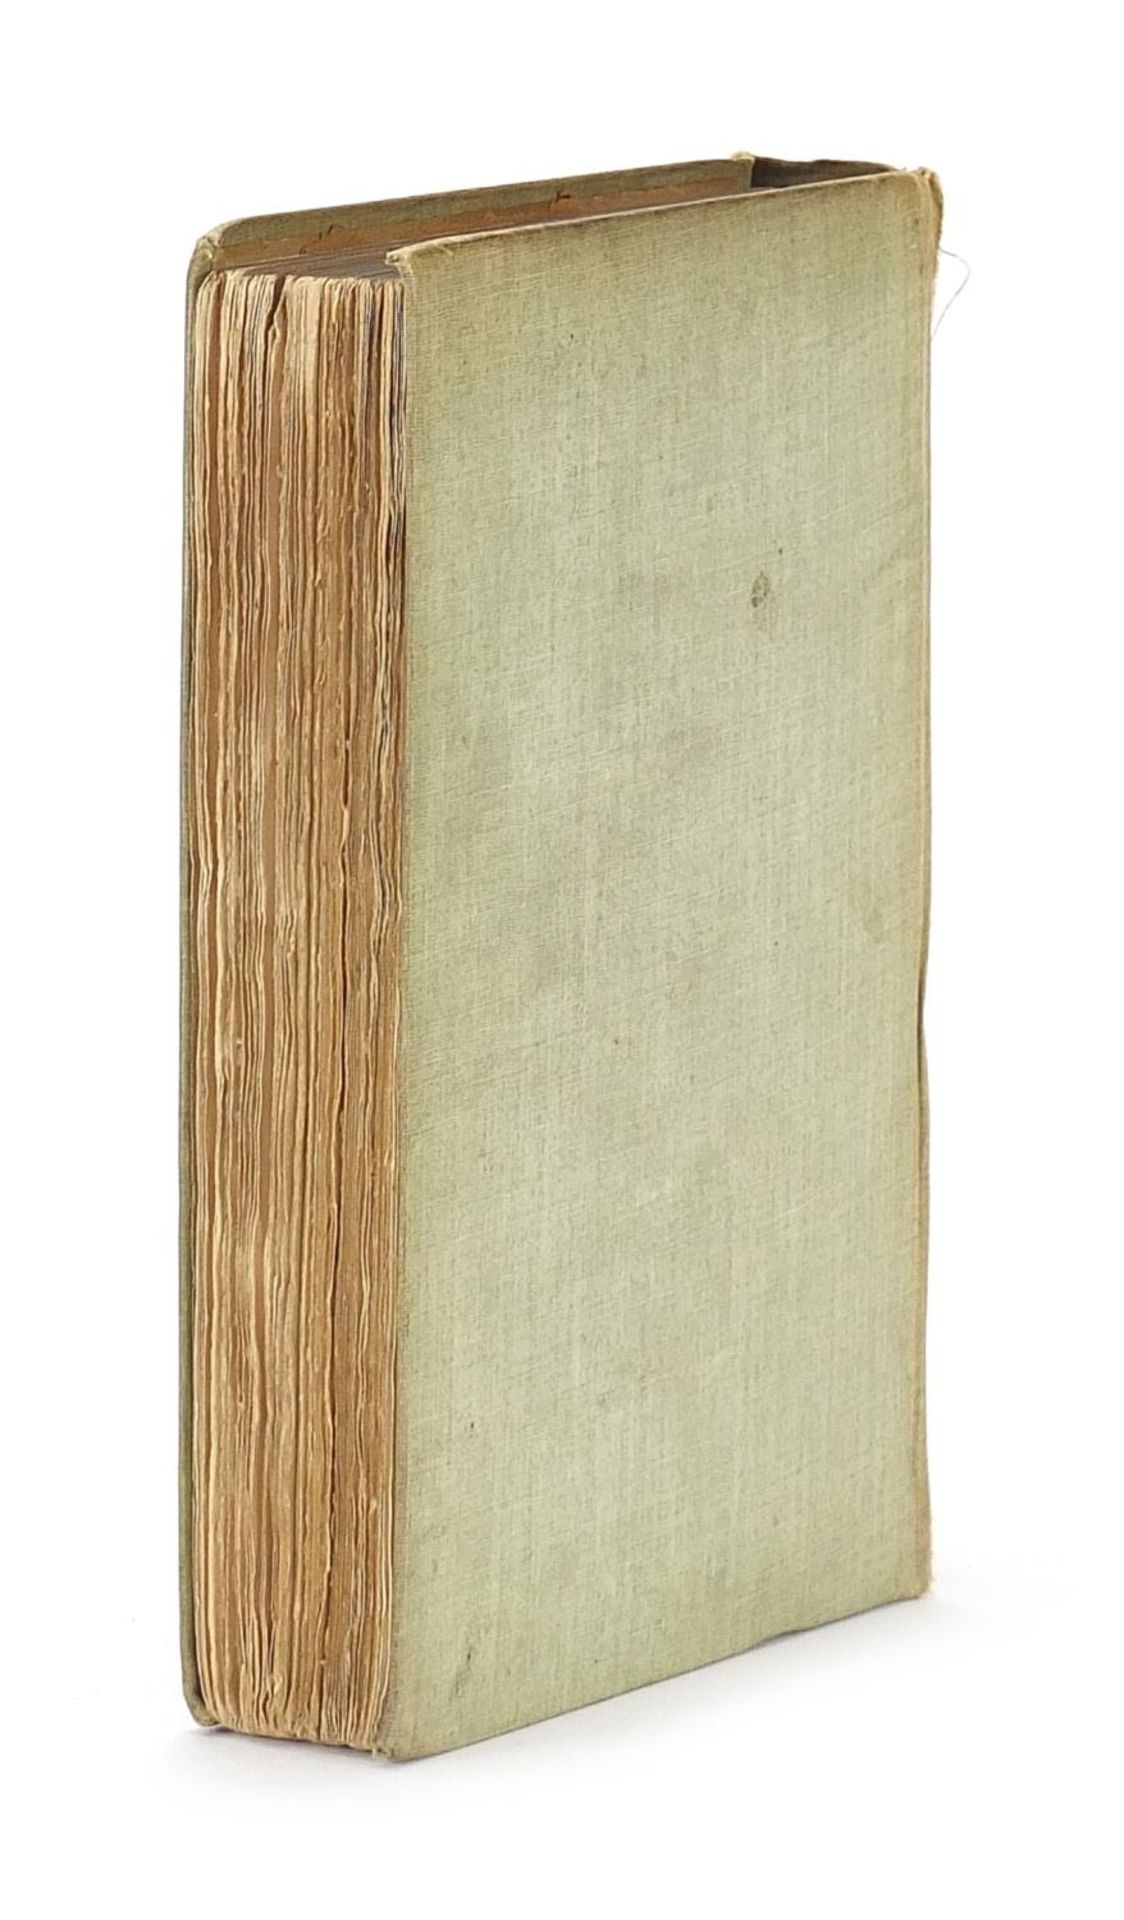 Emma by Jane Austen, hardback book published 1909 : For Further Condition Reports Please Visit Our - Image 5 of 5